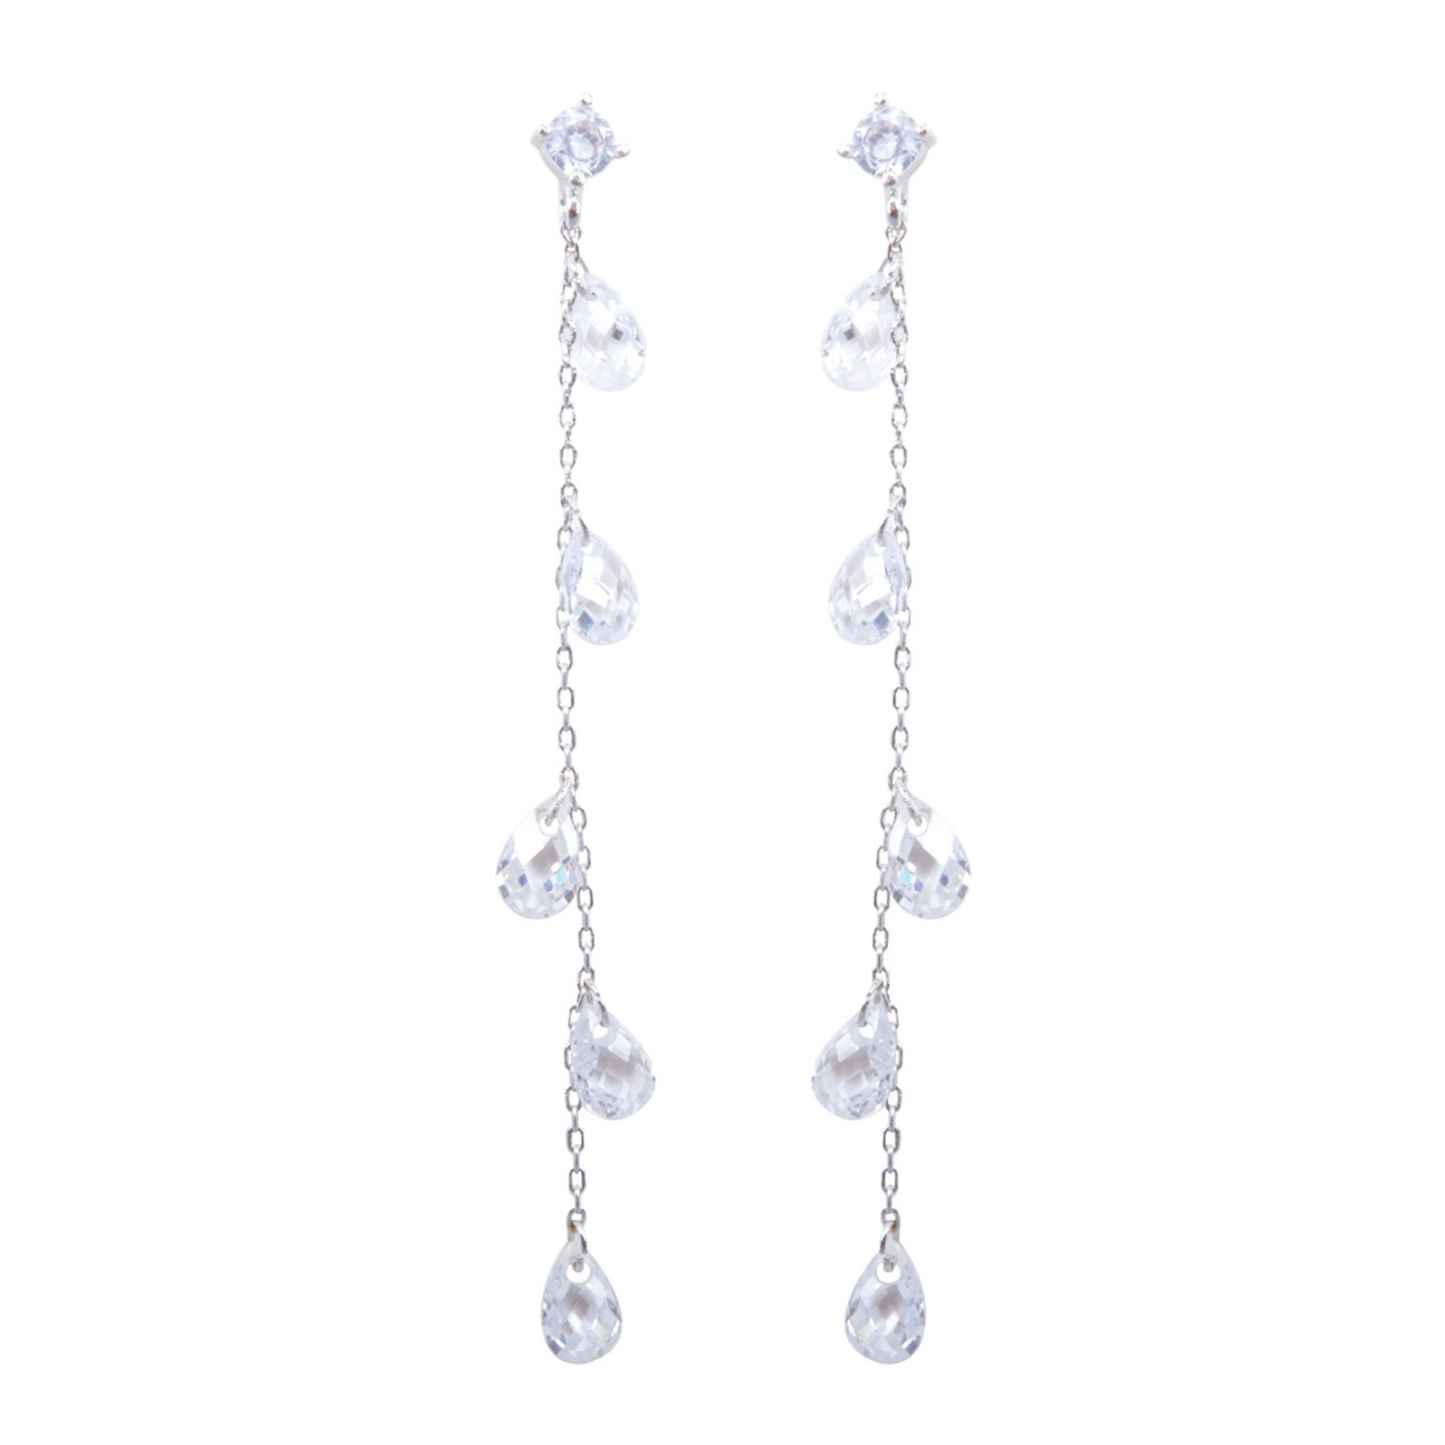 Expertly crafted with dazzling rhinestone accents, these Crystal Teardrop Long Earrings will add a touch of elegance to any outfit. The teardrop shaped gems glisten in the light, while the silver finish adds a subtle shine. Elevate your look with these stunning dangle earrings.